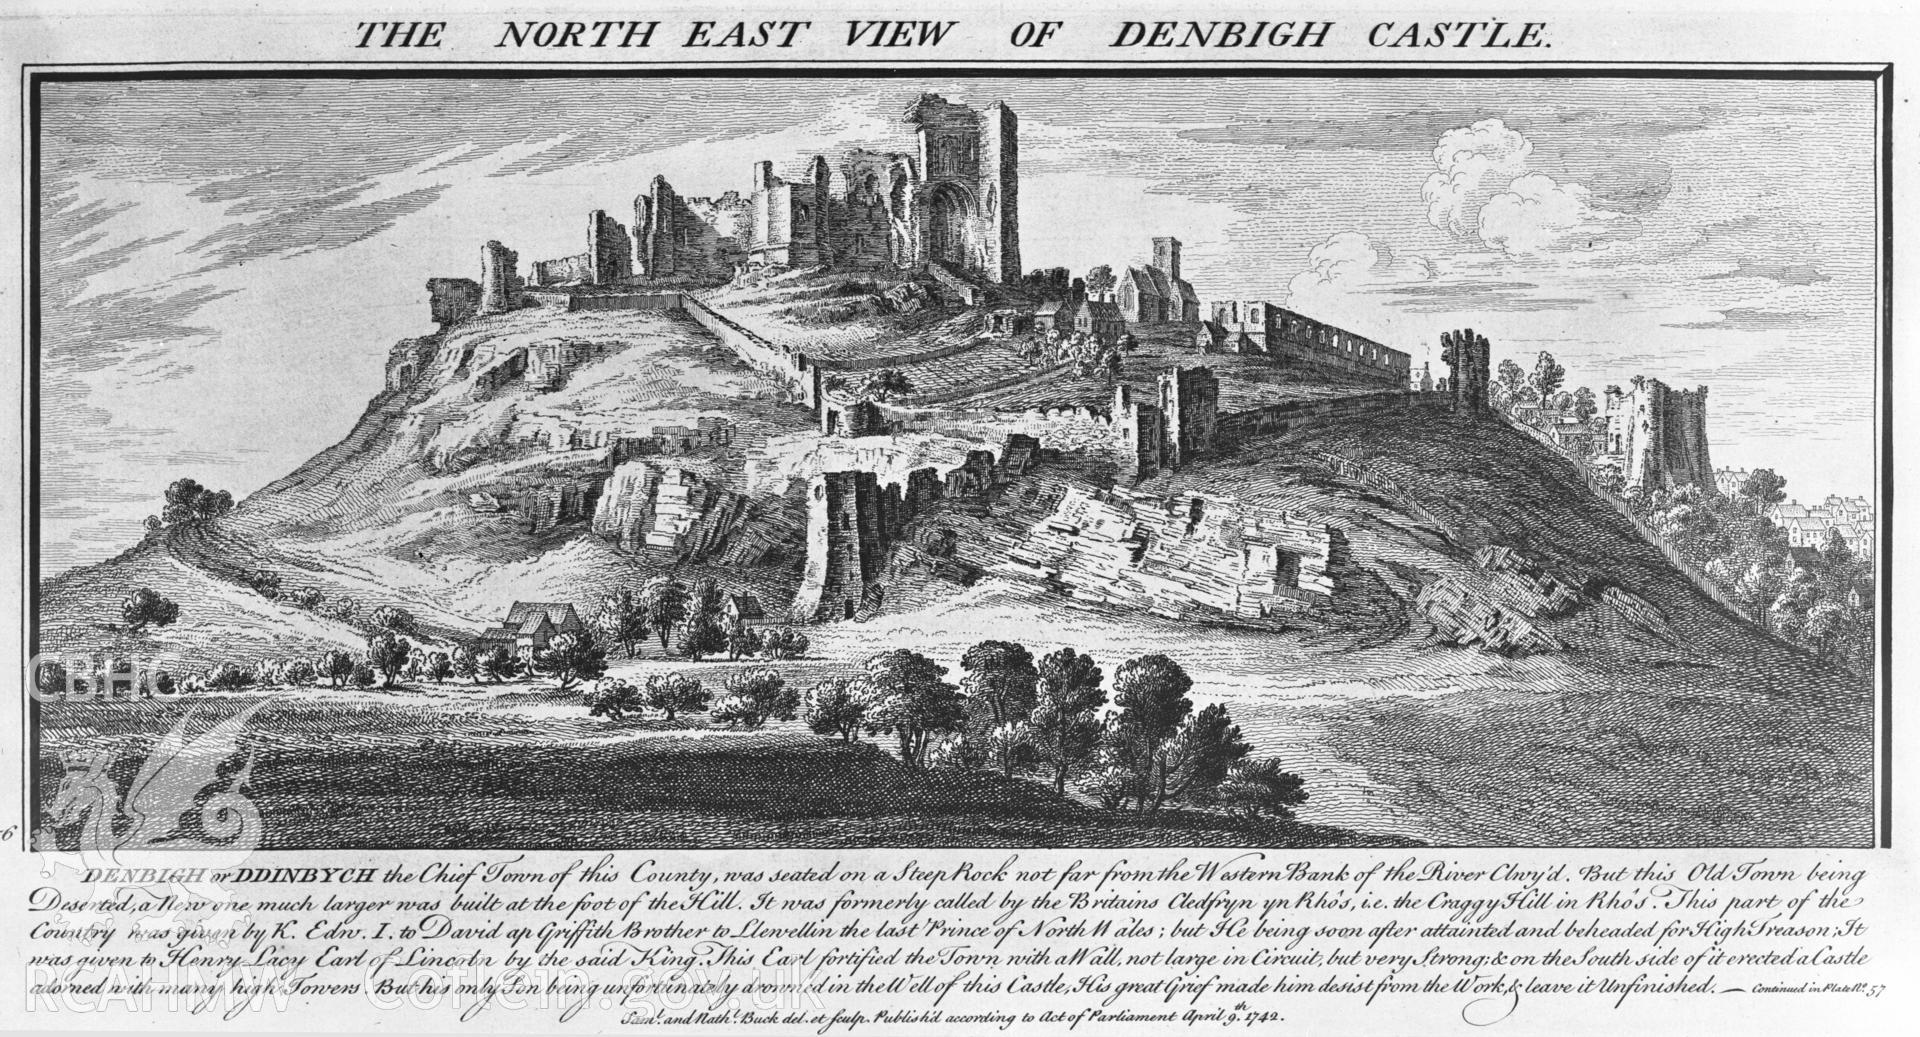 Engraving and text of the north east view of Denbigh Castle.